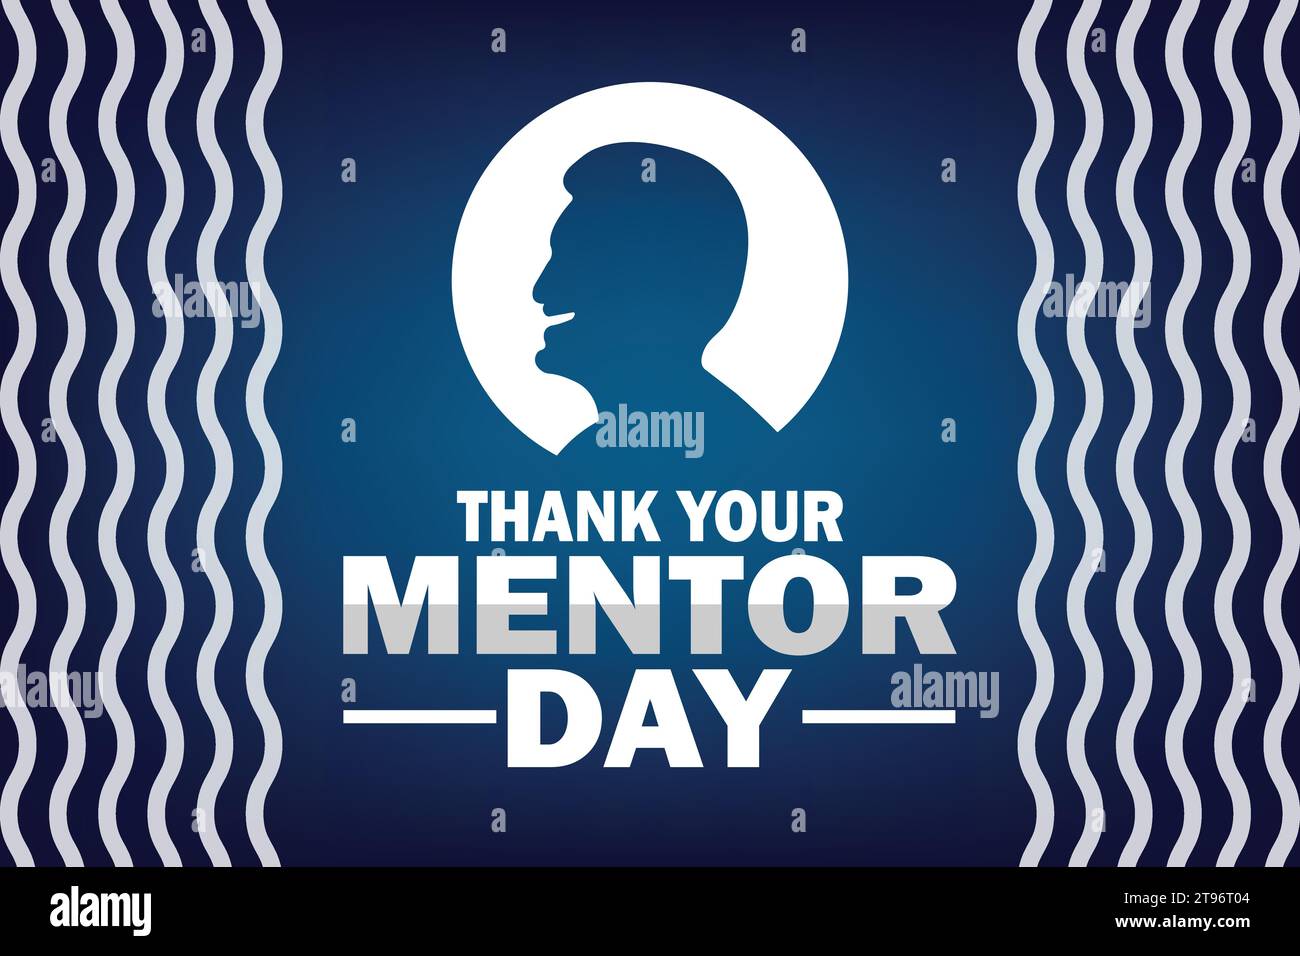 Thank Your Mentor Day Vector illustration. Holiday concept. Template for background, banner, card, poster with text inscription. Stock Vector